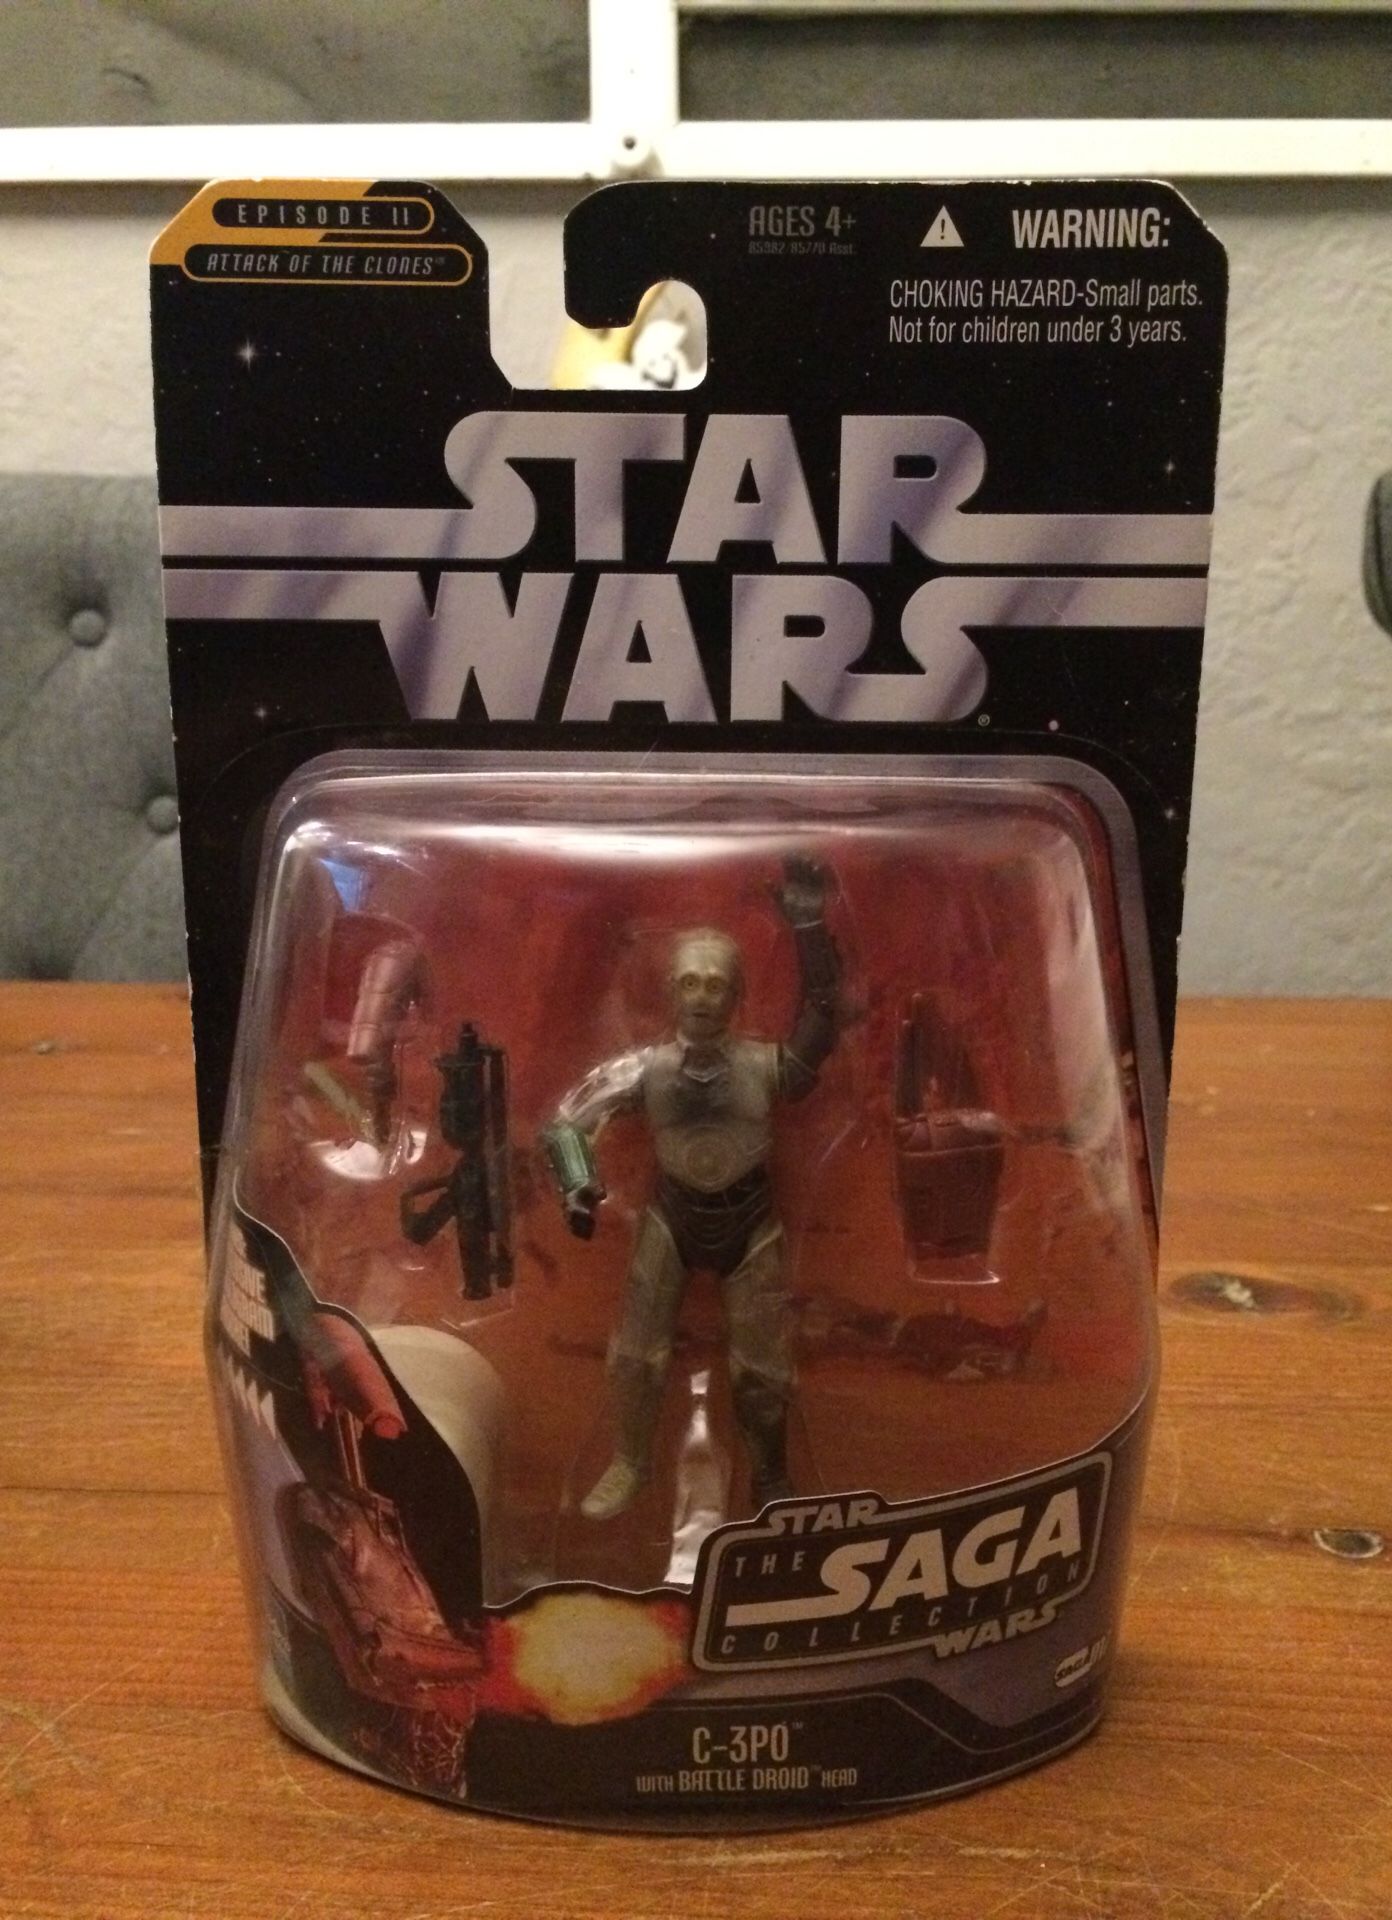 Star Wars The Saga Collection #17 Episode II Attack of the Clones C-3PO with Battle Droid head action figure